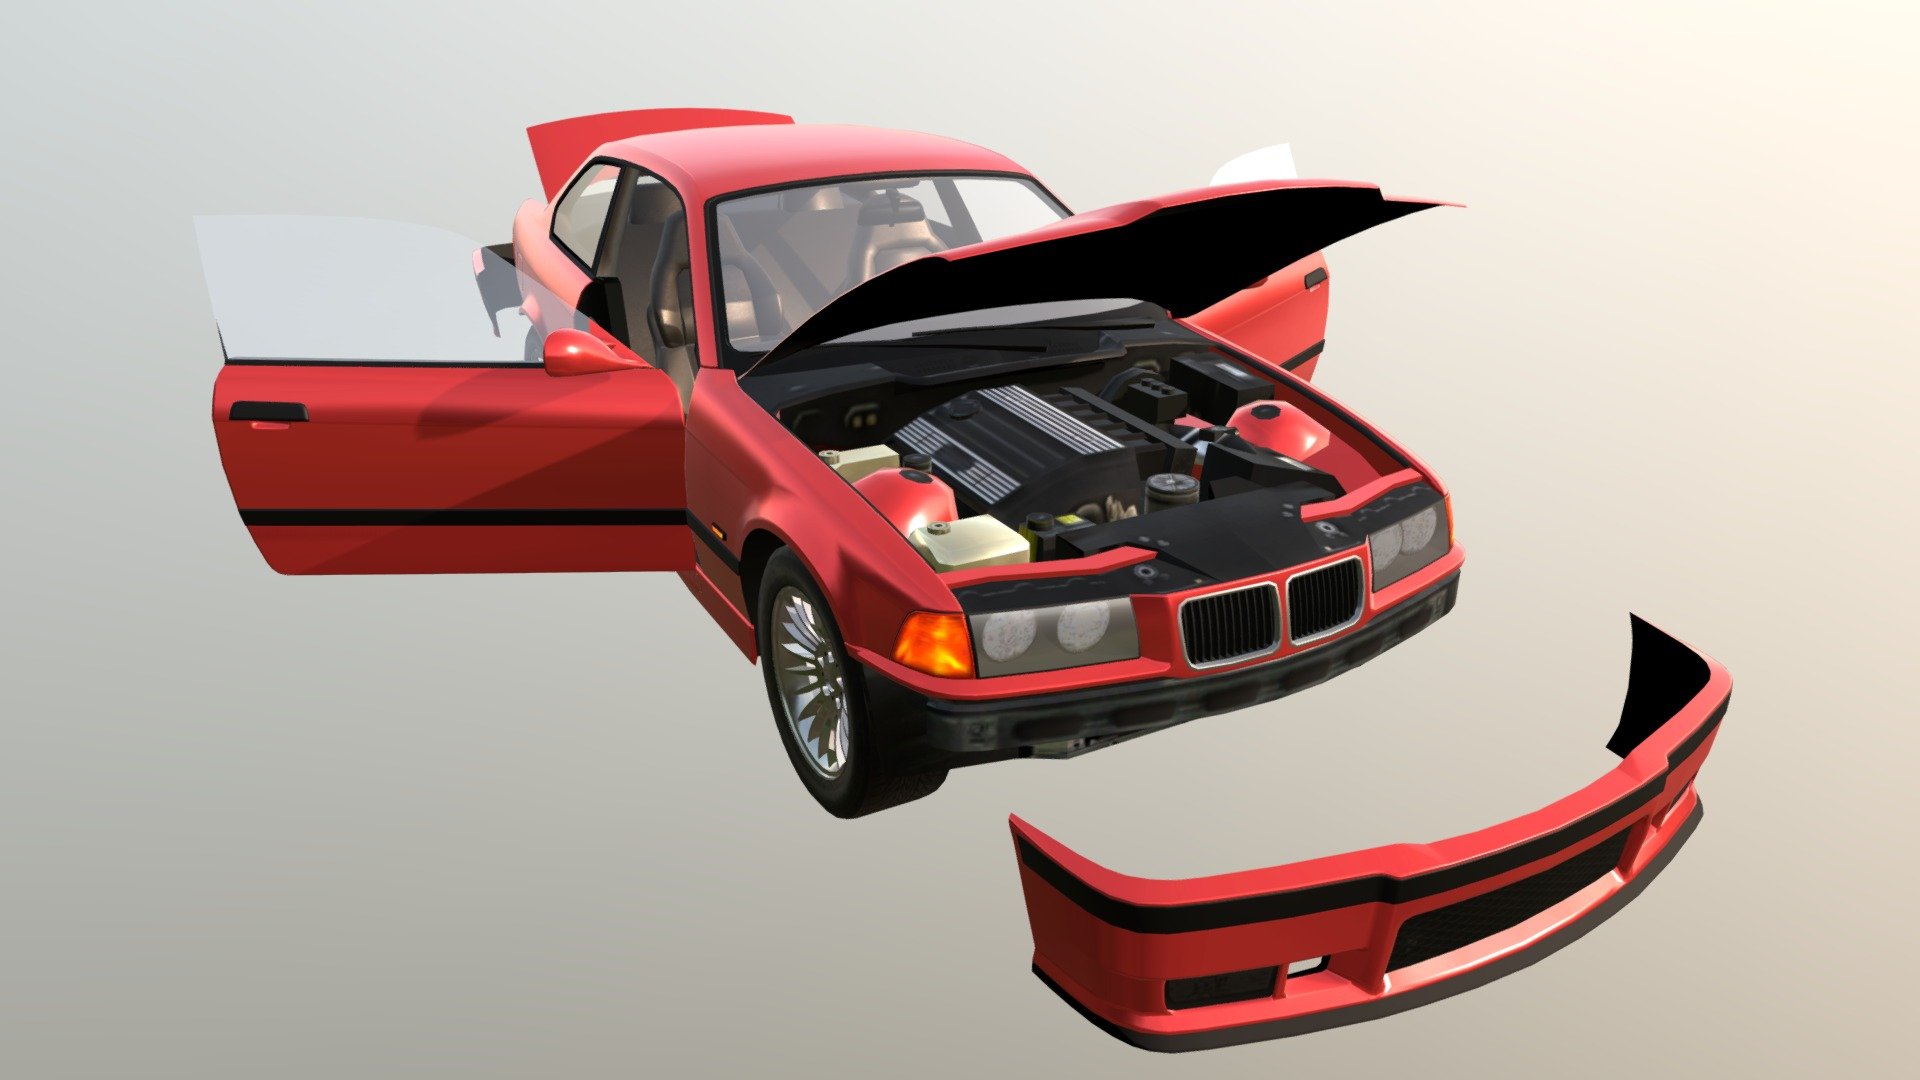 Package Contains a Beautiful Car model with fully textured Good Quality Interior and open-able doors, Bonnet, Boot etc. Ready to use in Your game. This model has 4 LODs and using Atlas Texture so it can be used for PC and mobile projects.
Perfect for any Games like Third-Person Games, First-Person Games, Car Destruction Games or any other Car Games. 

Our Real Car 7 And Real Car 7 Separated Parts are same Models.

LOD Details: 

Car LODs:

-LOD0: 49955 tris 
-LOD1: 30973 tris 
-LOD2: 12072 tris 
-LOD3: 76 tris 




Materials using PBR Unity Standard shader. Albedo, metallic, smoothness, normal and occlusion textures included. 

Car only using one single Atlas PBR Texture.

Car using Five Materials Paint,Interior,Glass,Mirror,Rim.

Emissive texture for lights included. 

Model is properly scaled and aligned along Z-axis. 

Fully textured Good Quality Interior and Exterior.

Separated four wheels,steering wheel, dashboard pointers, glasses Doors, Front and Back Bumper, Bonnet, Boot.
 - Real Car 7 Separated Parts - 3D model by Maker Games Studios (@MakerGamesStudios) 3d model